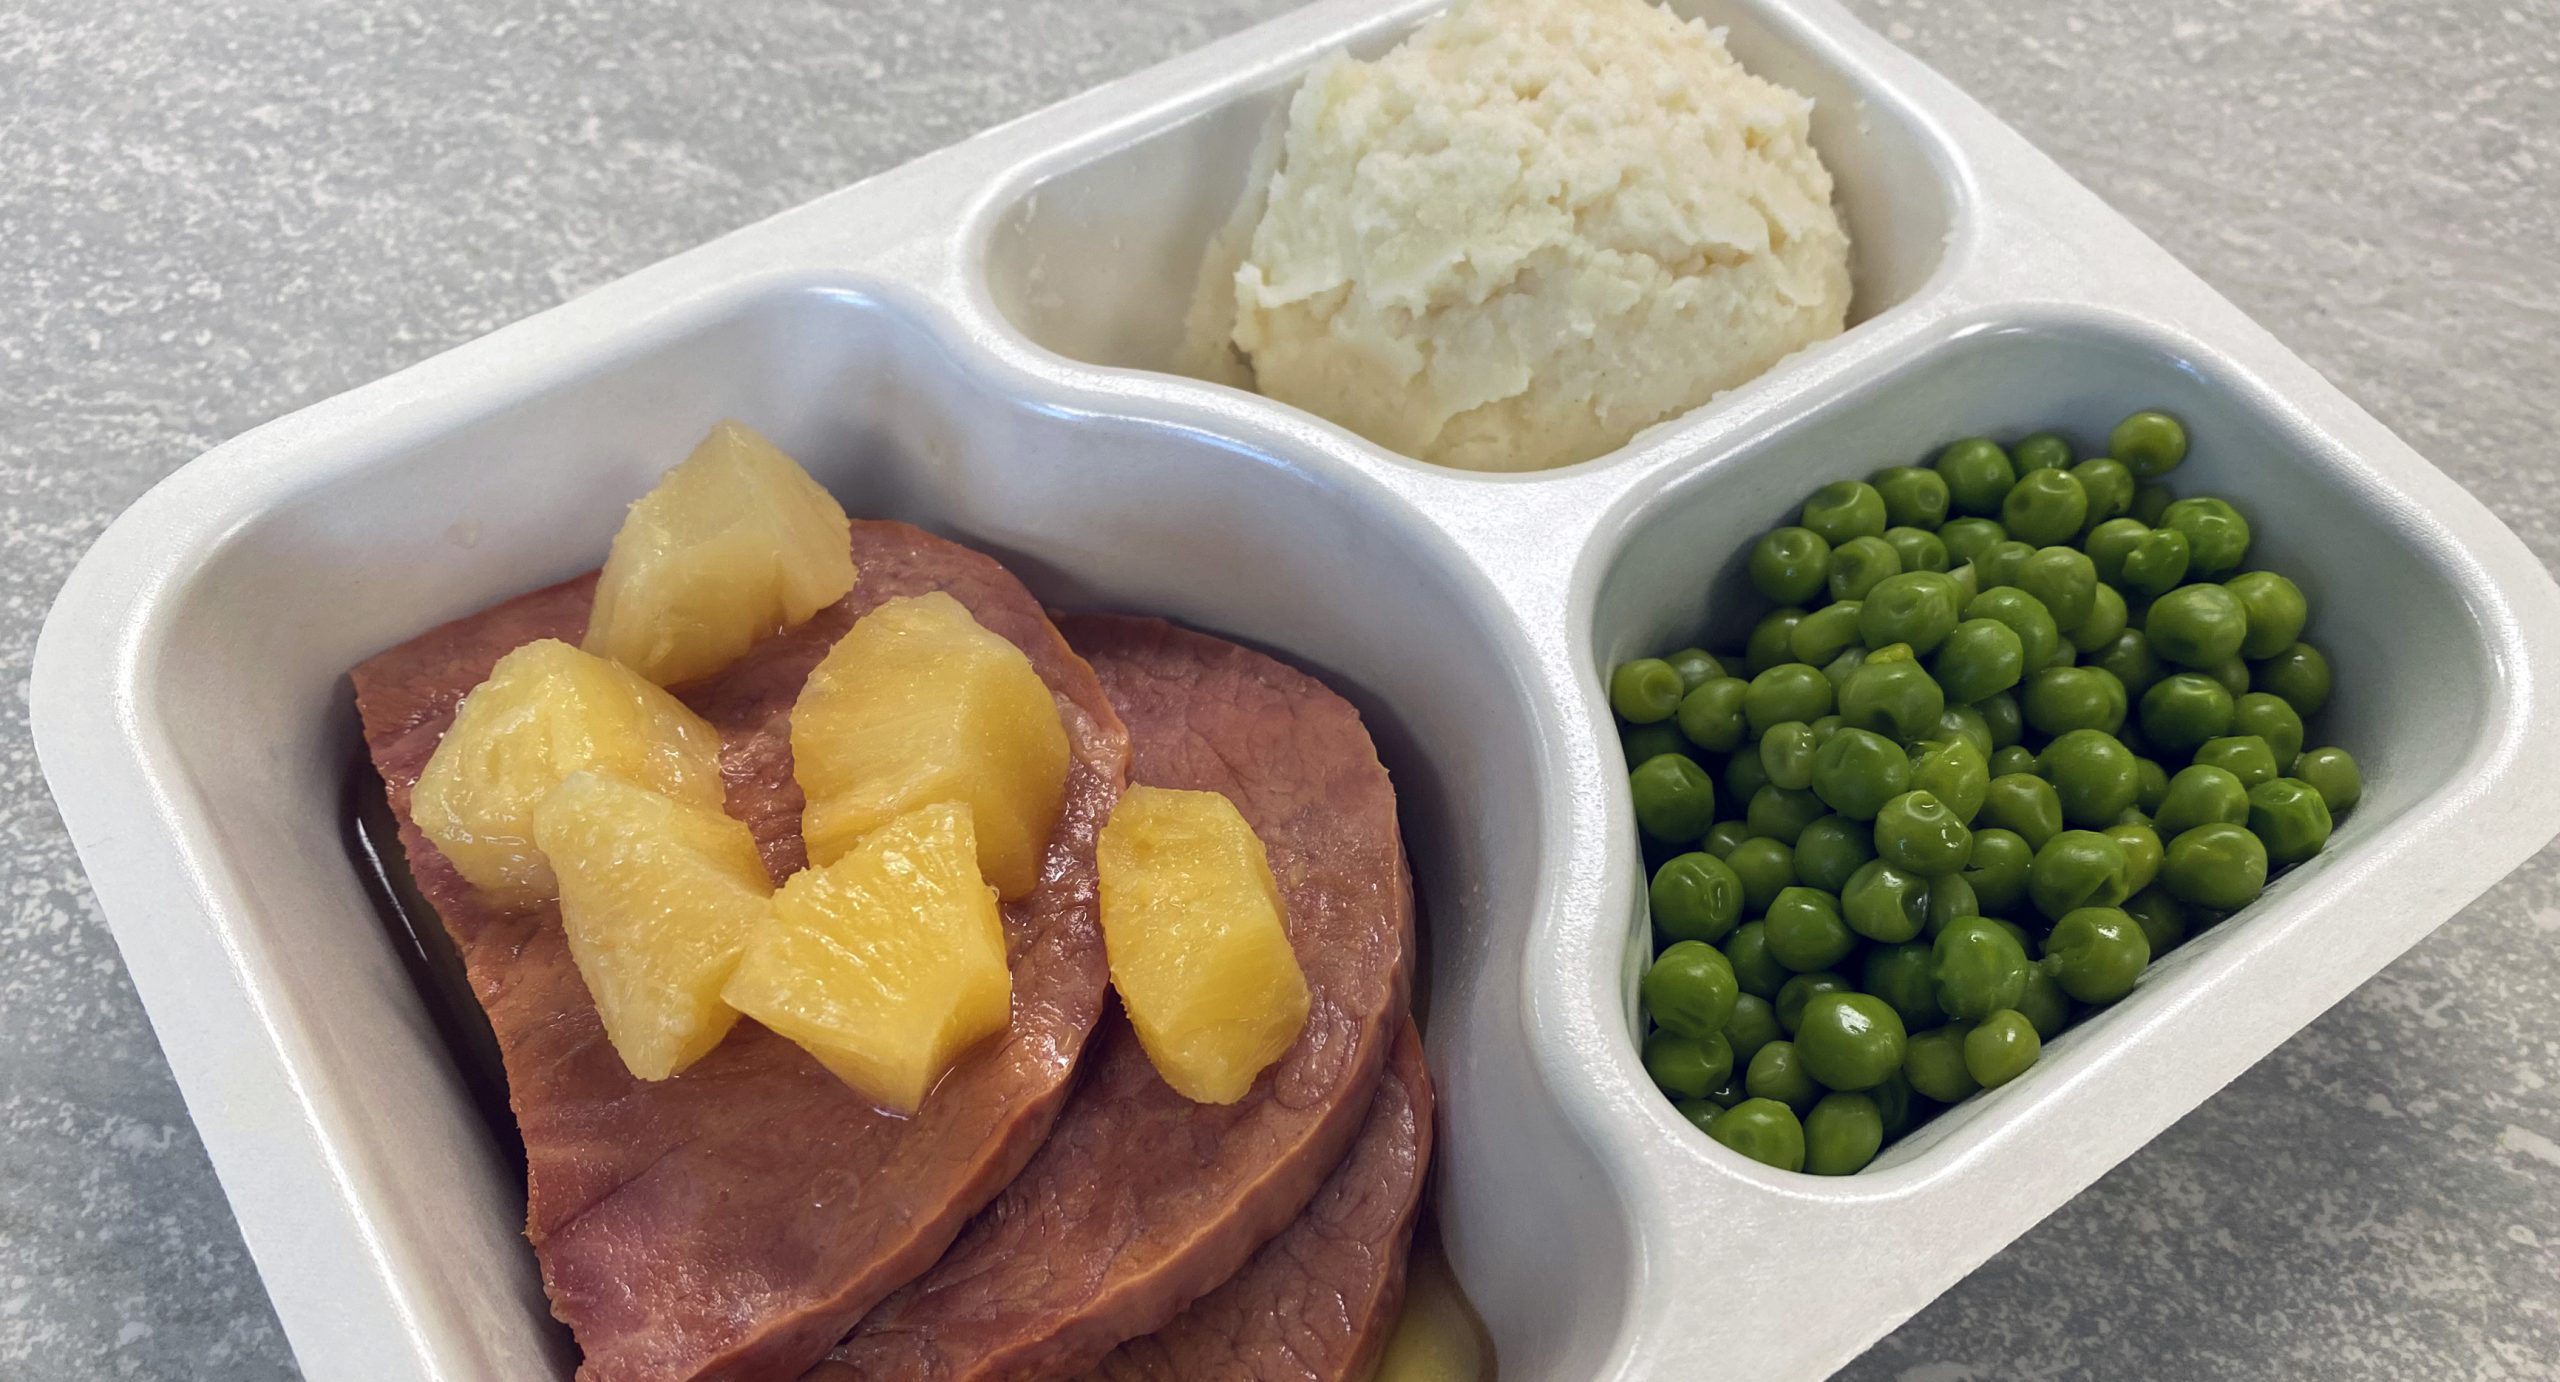 Ham with pineapple, peas, and mashed potatoes